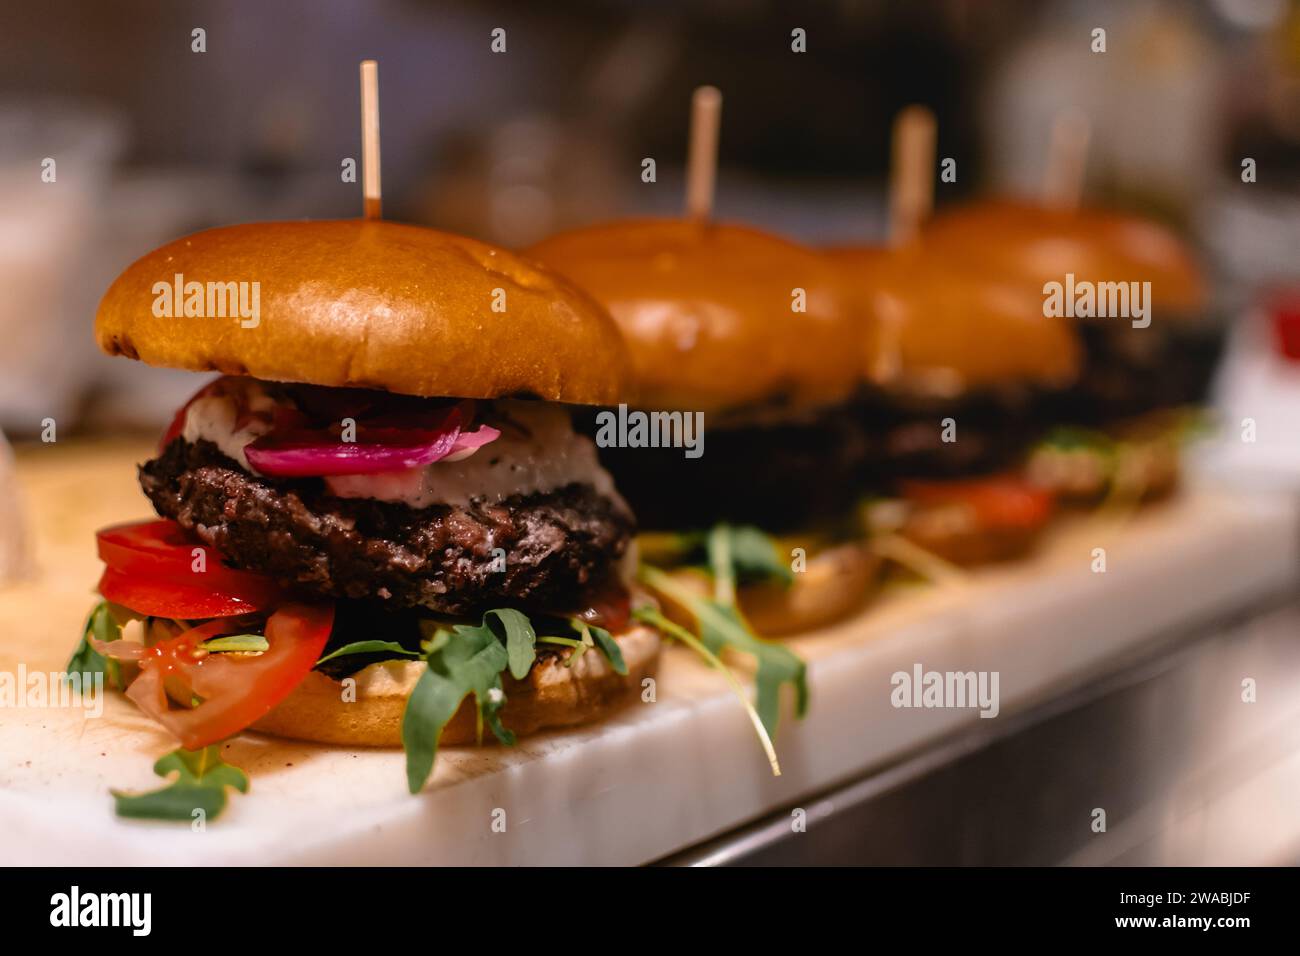 Delicious Burgers, ready to harvest Stock Photo